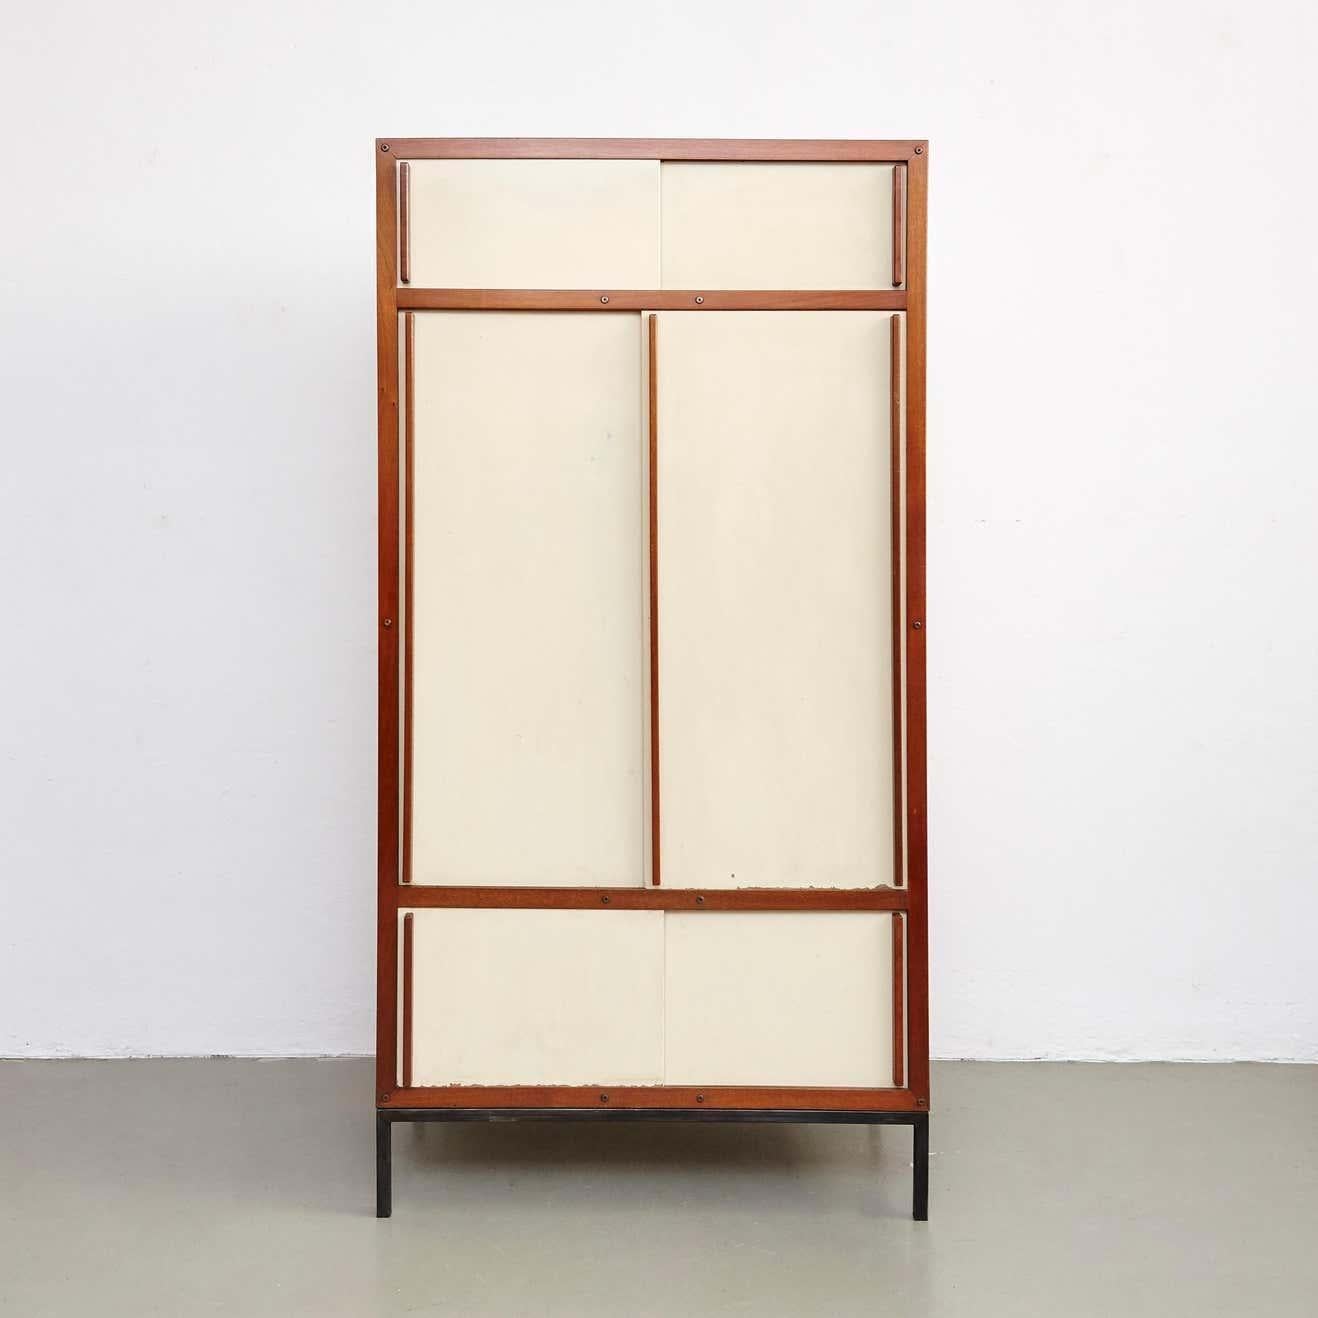 Cabinet designed by André Sornay.
Manufactured in France in 1950s.

In original condition with minor wear consistent with age and use, preserving a beautiful patina.
The metal base structure is redone.

André Sornay (France, 1902-2000) joined